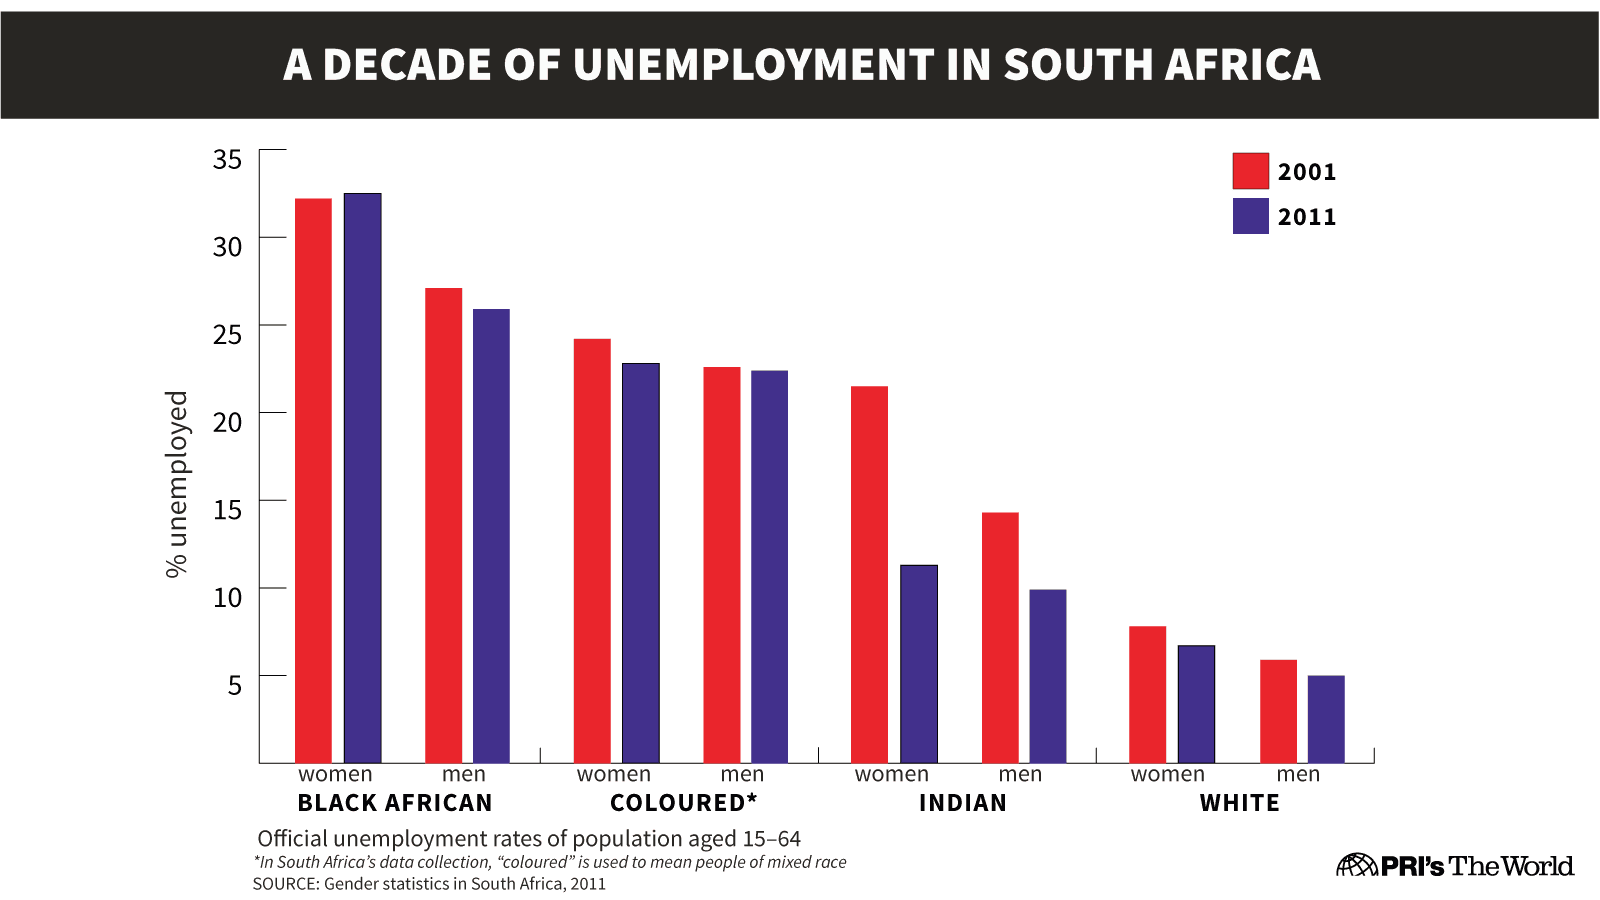 Unemployment for Black African women increased from 2001 to 2011. All other groups saw declines.